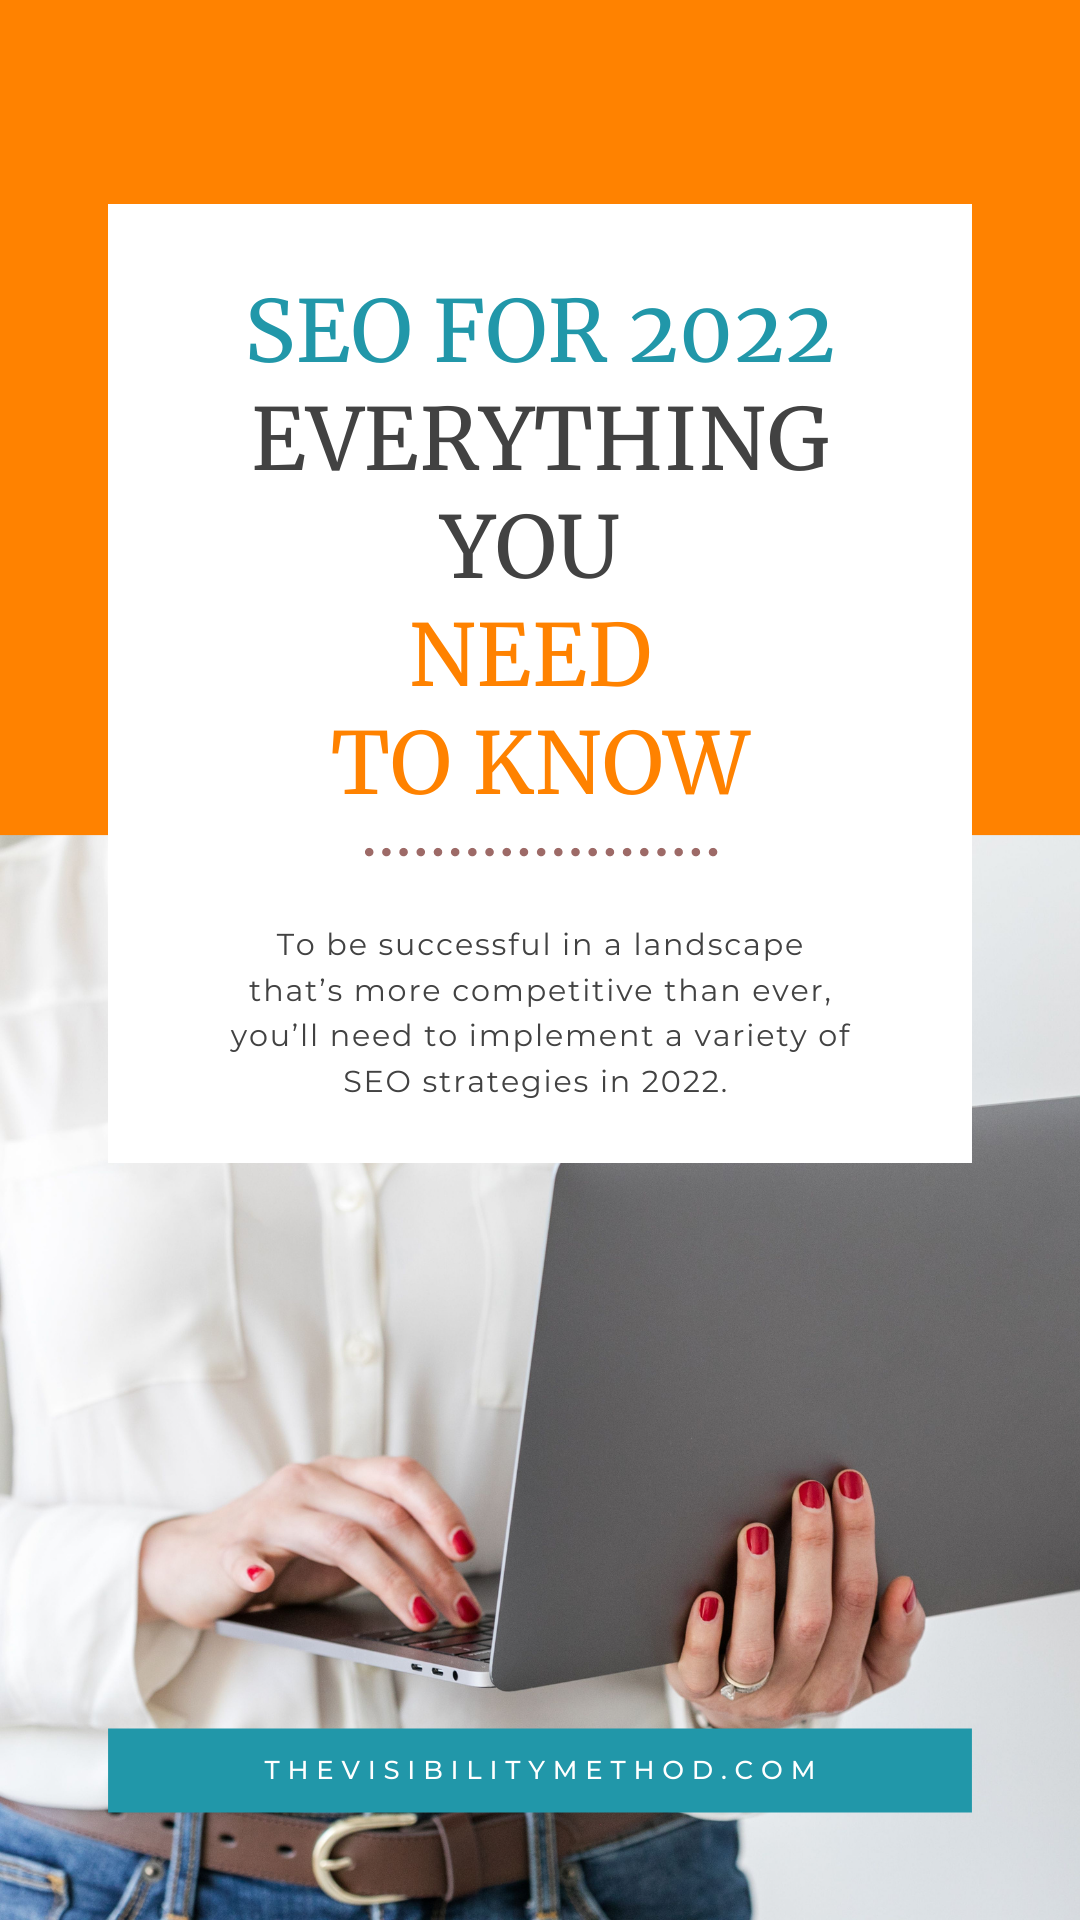 Everything You Need to Know About SEO for 2022